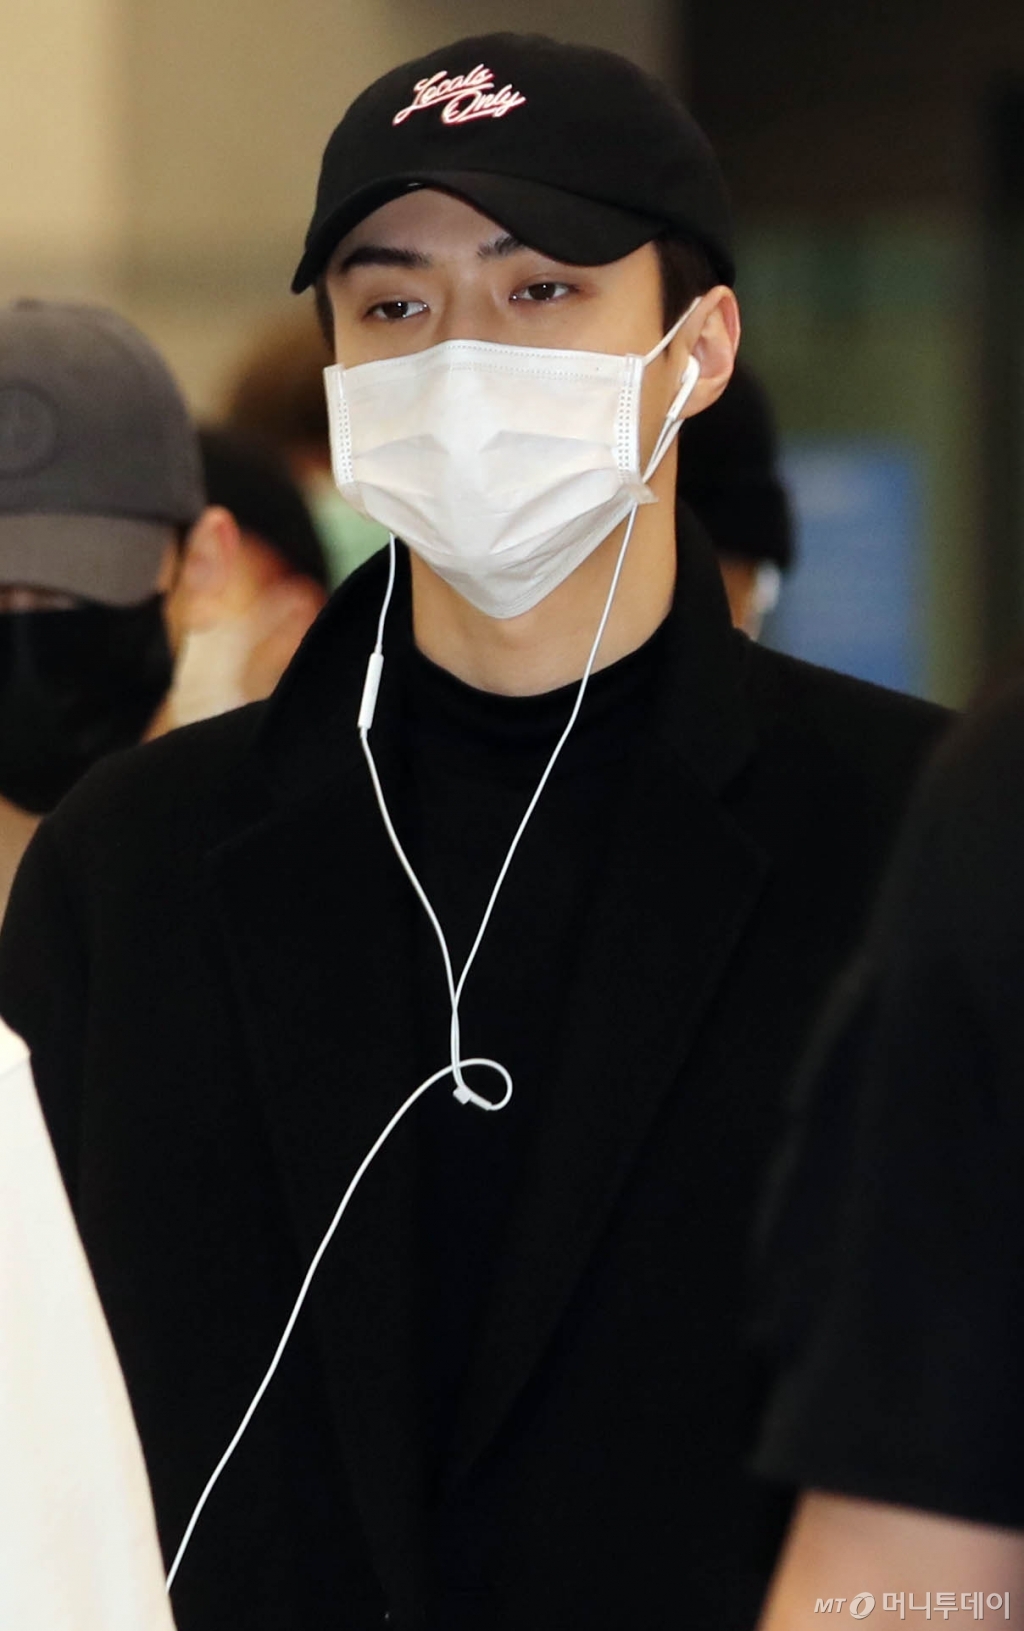 Group EXO Sehun arrives through the Incheon International Airport on Monday morning after a concert in Jakarta, Indonesia.